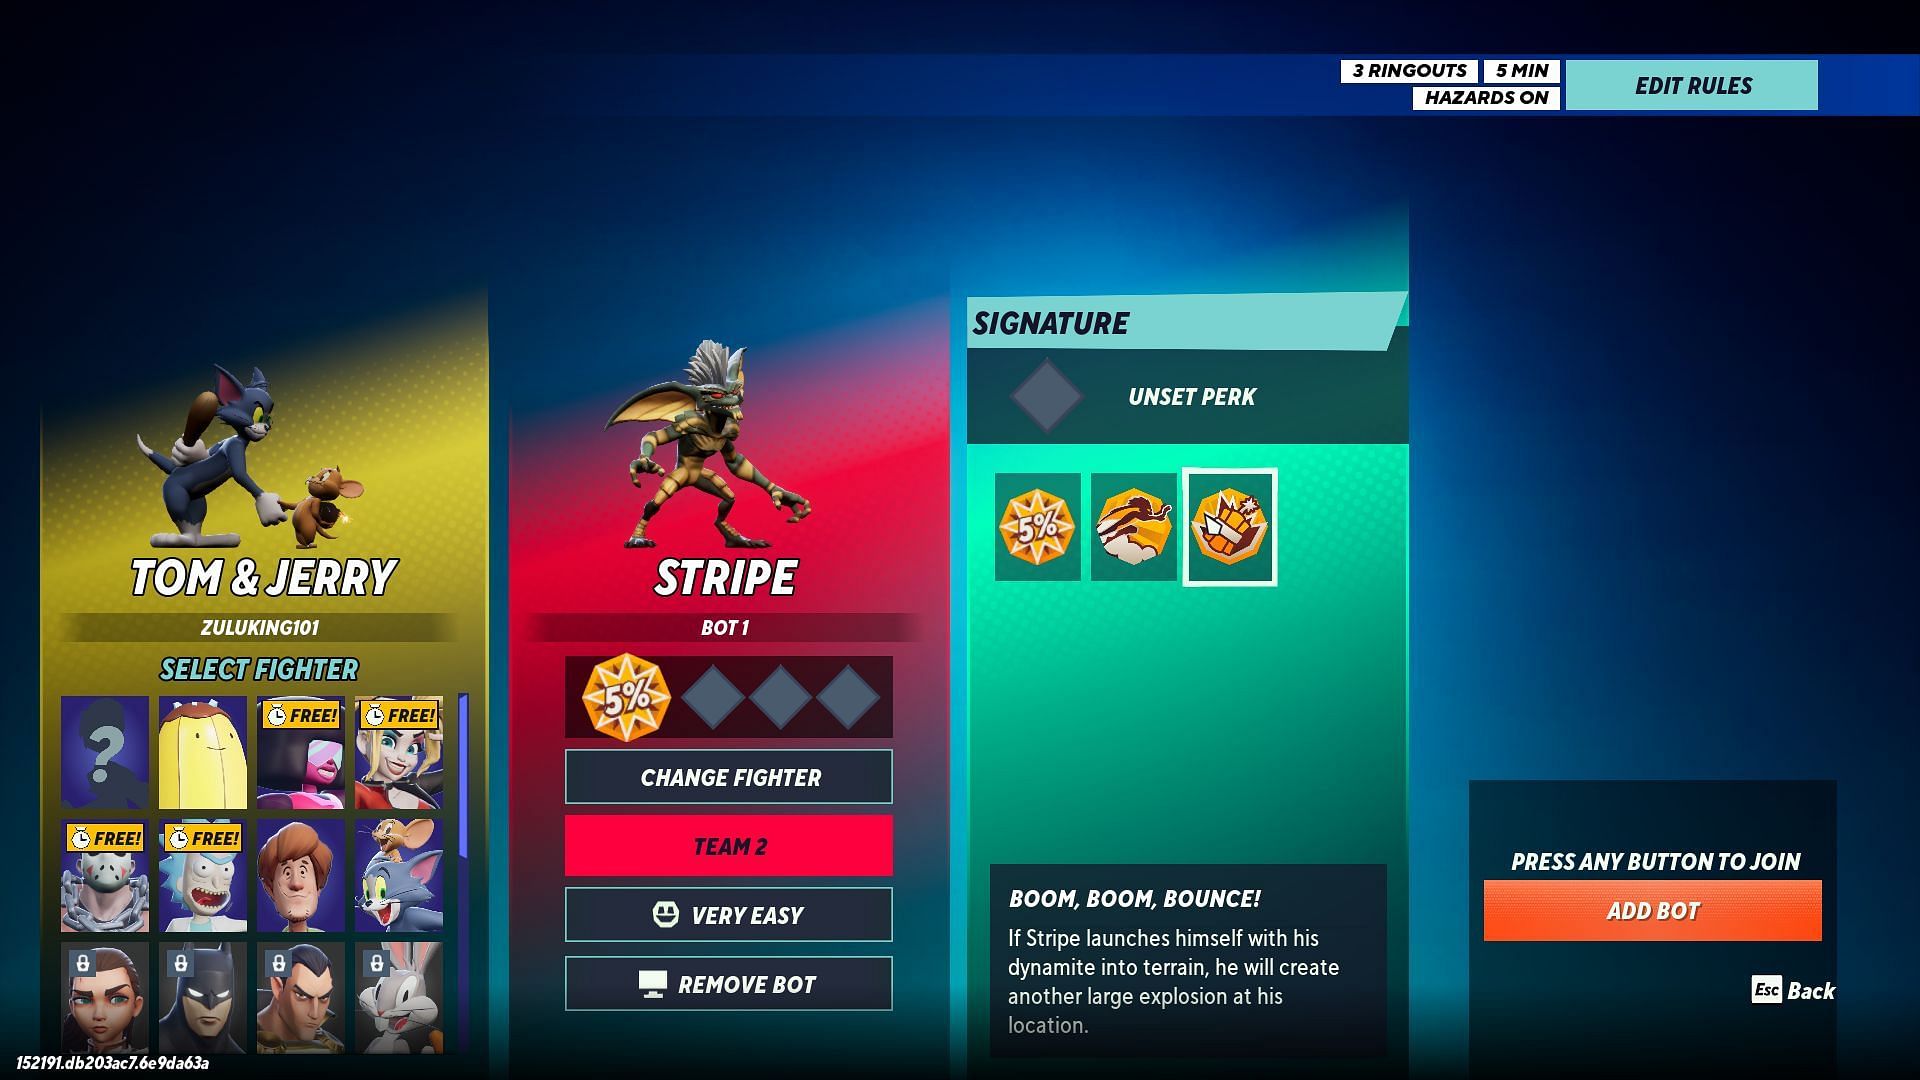 &quot;Boom, Boom, Bounce&quot; is a great signature perk choice for Stripe (Image via Player First Games)